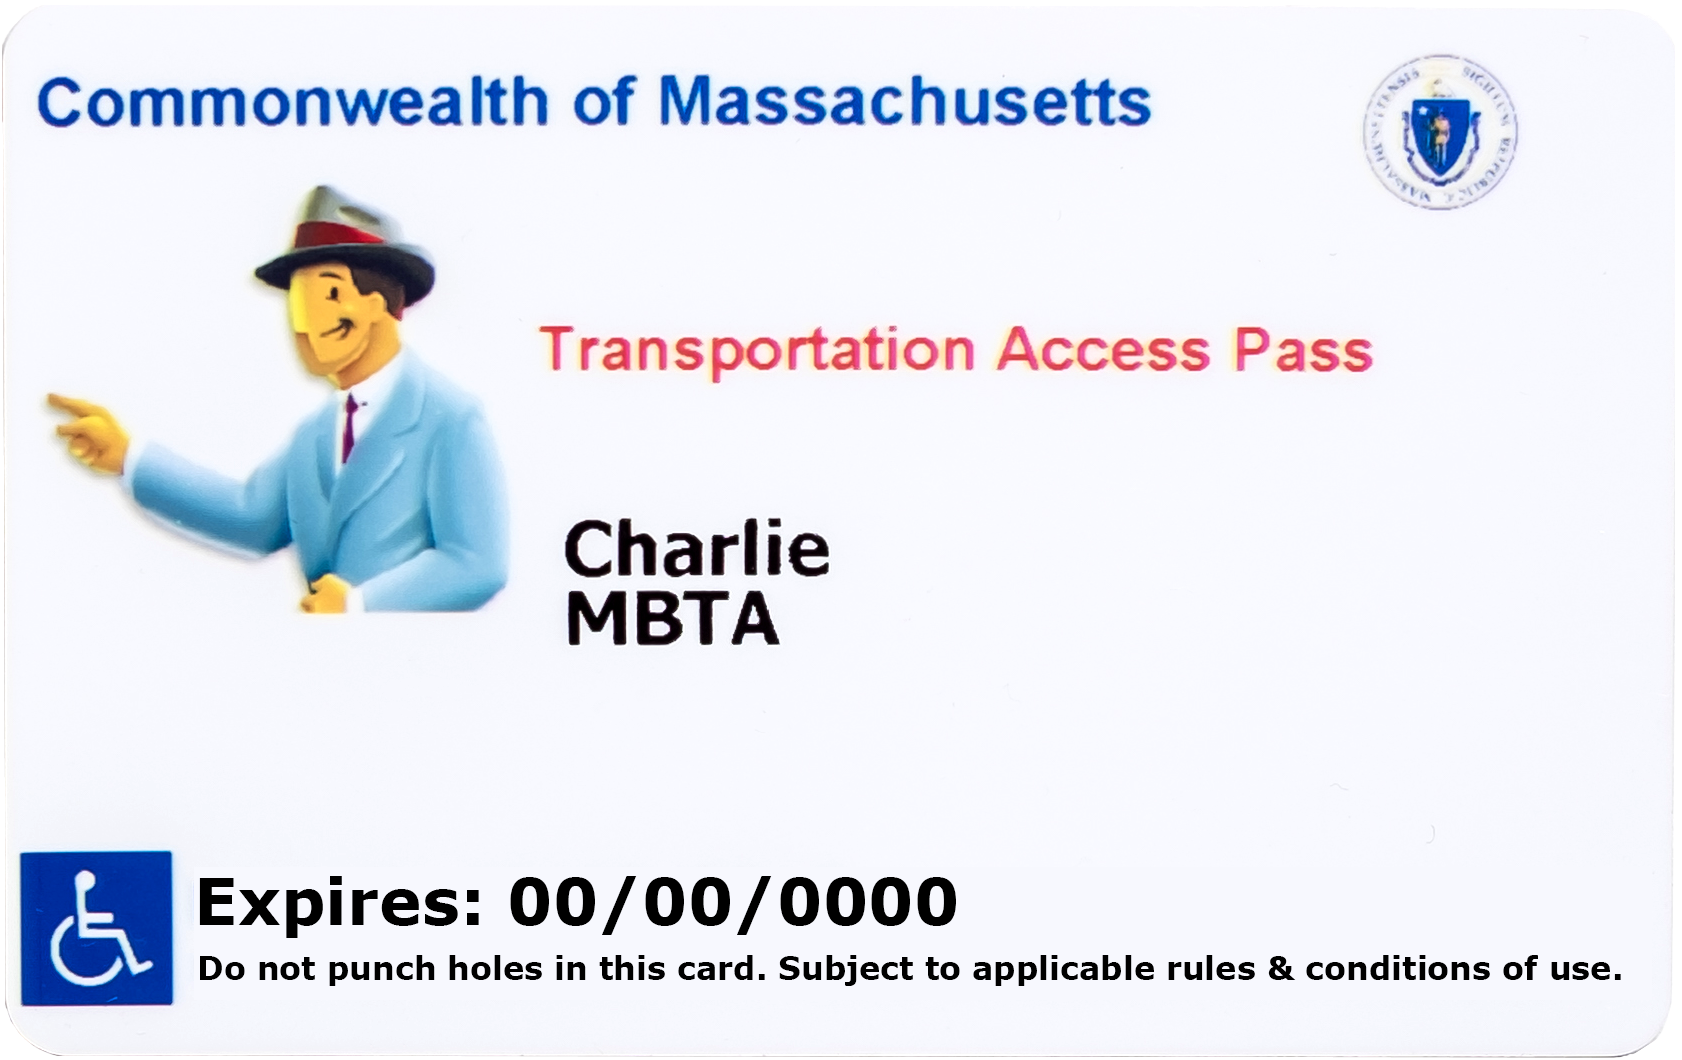 The revised Transportation Access Card as of July 2020